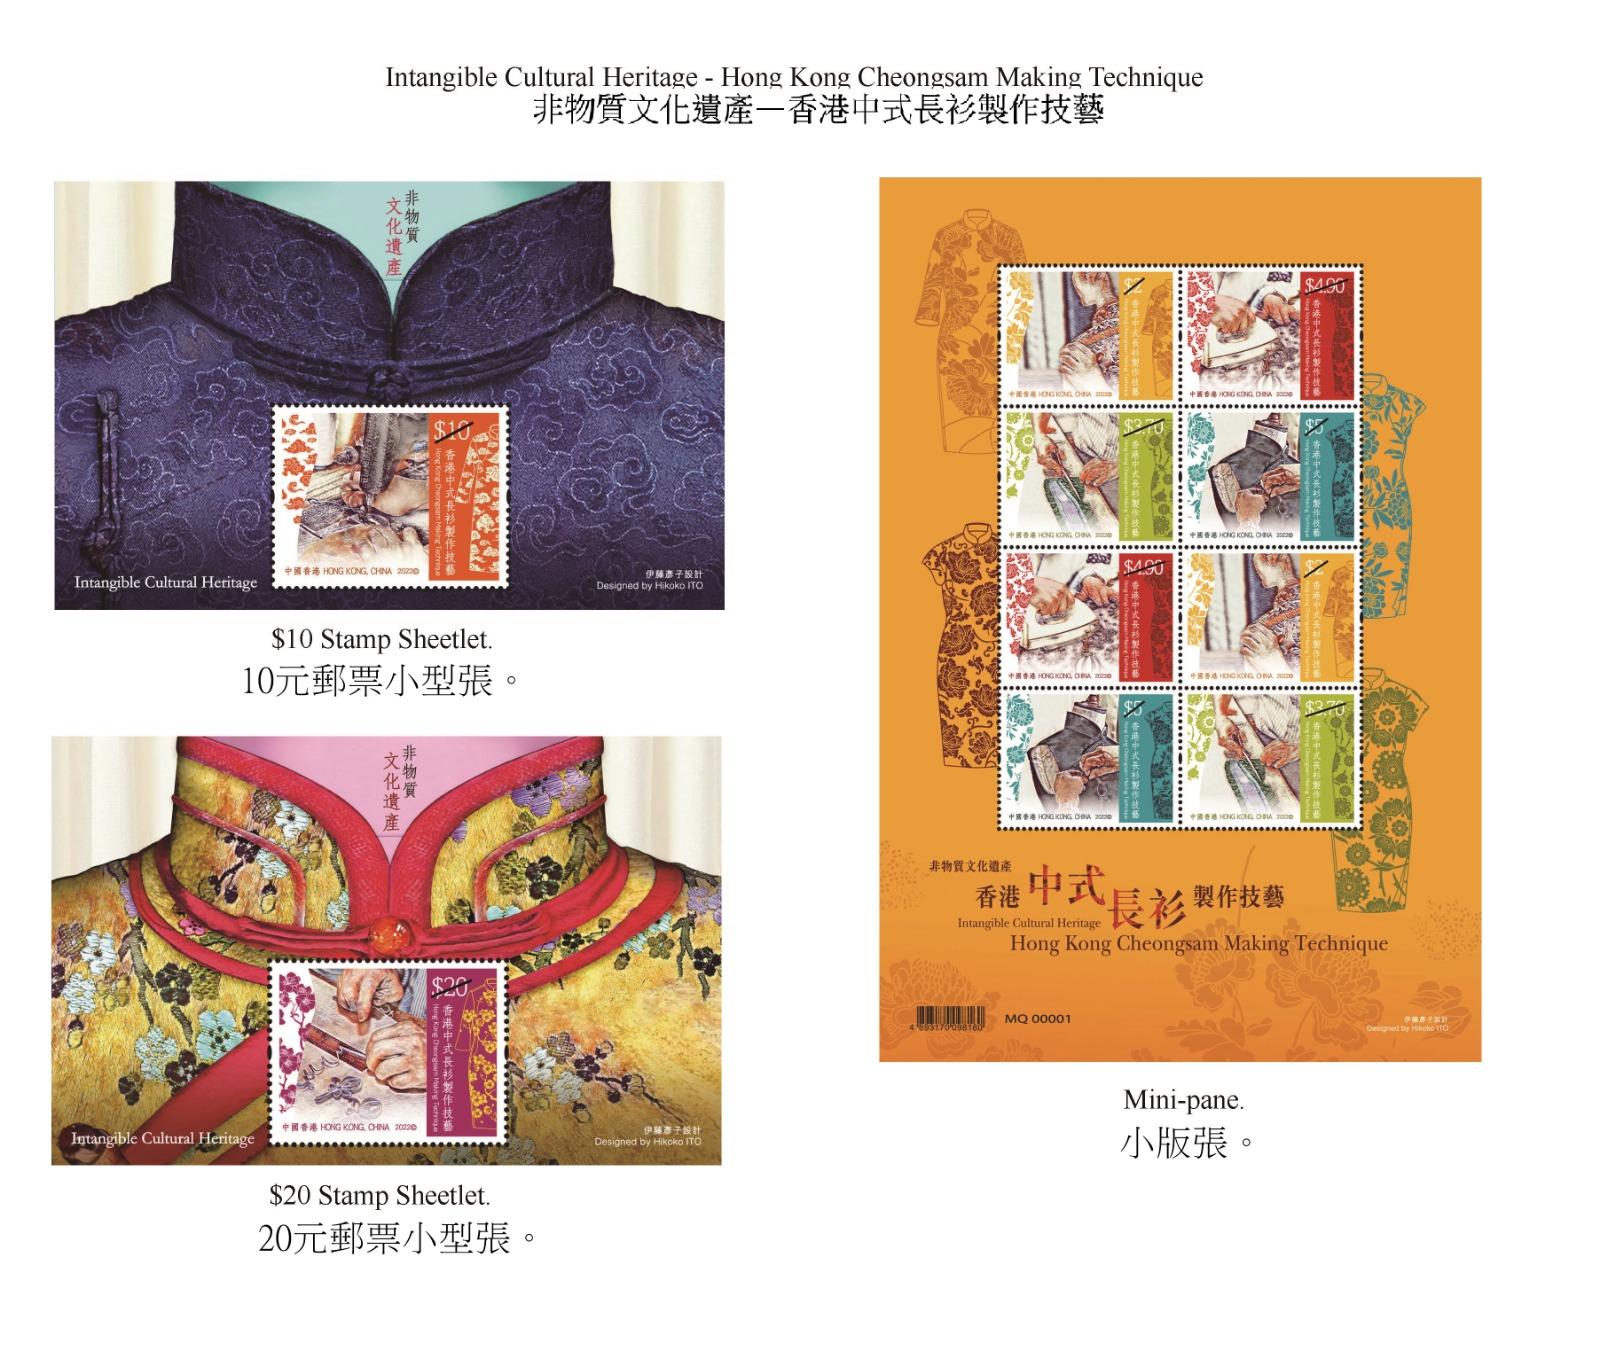 Hongkong Post will launch a special stamp issue and associated philatelic products on the theme of "Intangible Cultural Heritage – Hong Kong Cheongsam Making Technique" on September 22 (Thursday). Photo shows the stamp sheetlets and the mini-pane.